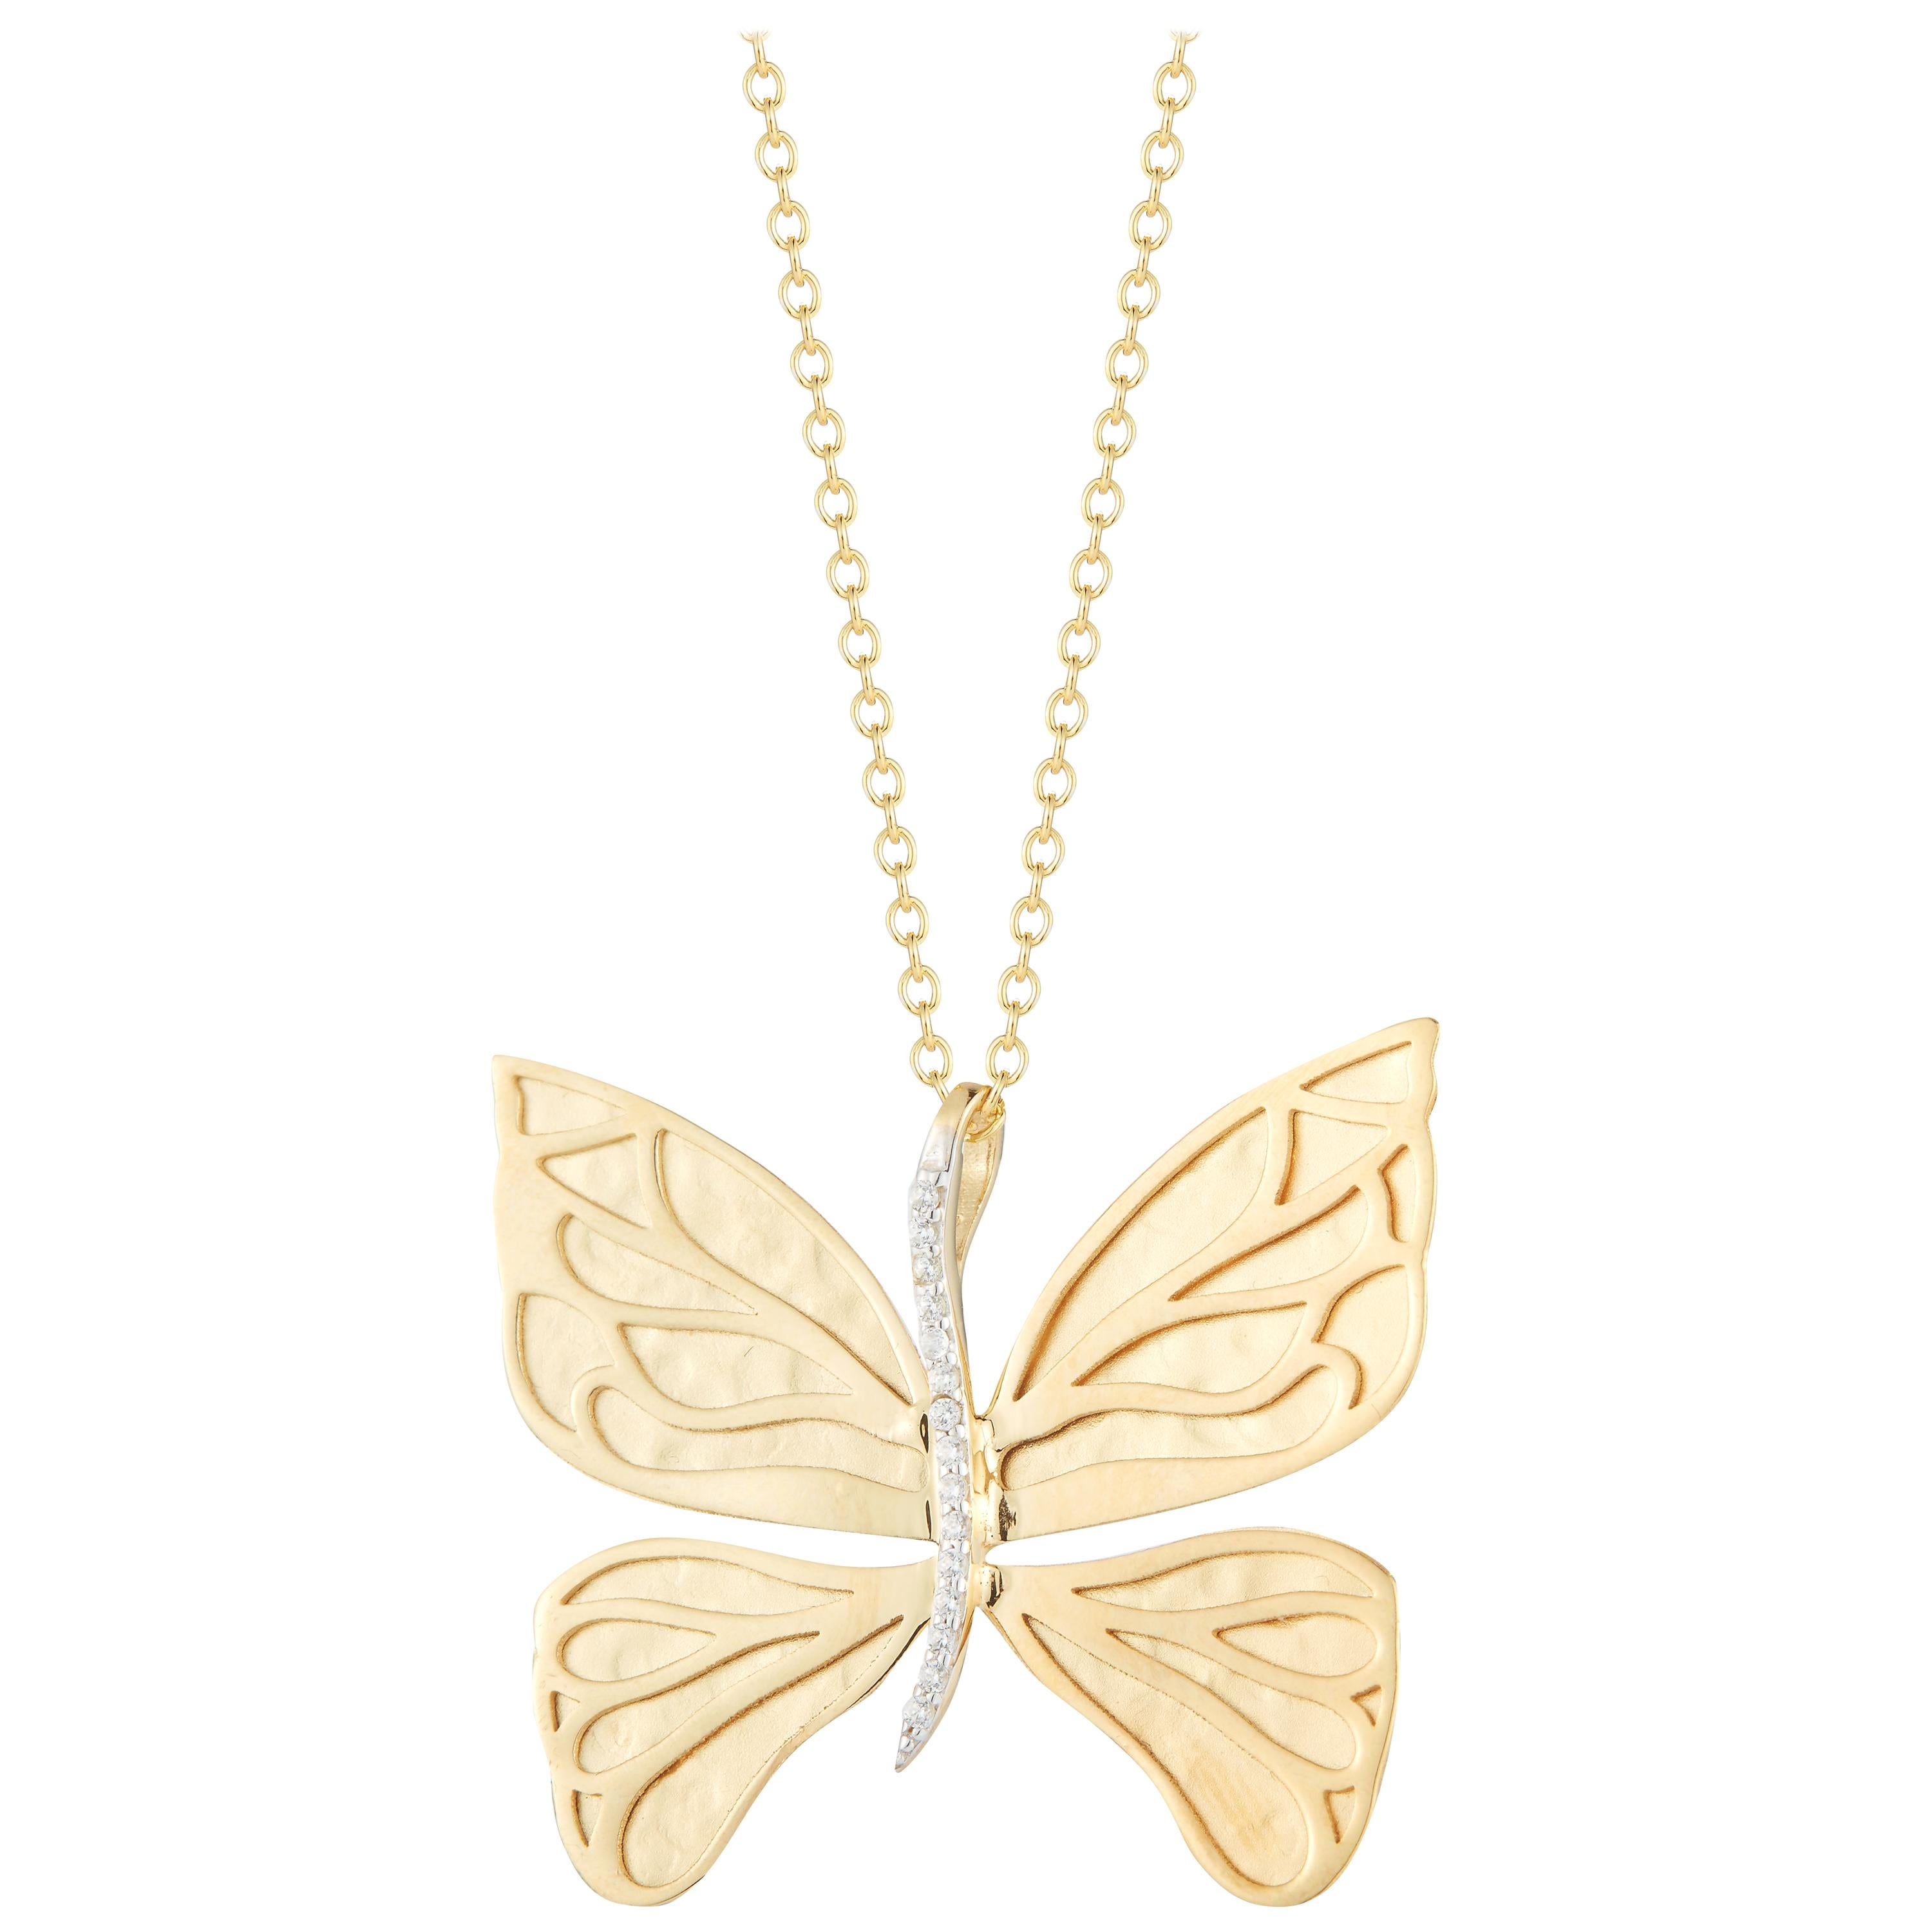 Handcrafted 14 Karat Yellow Gold Matt and Polish-Finished Butterfly Pendant For Sale